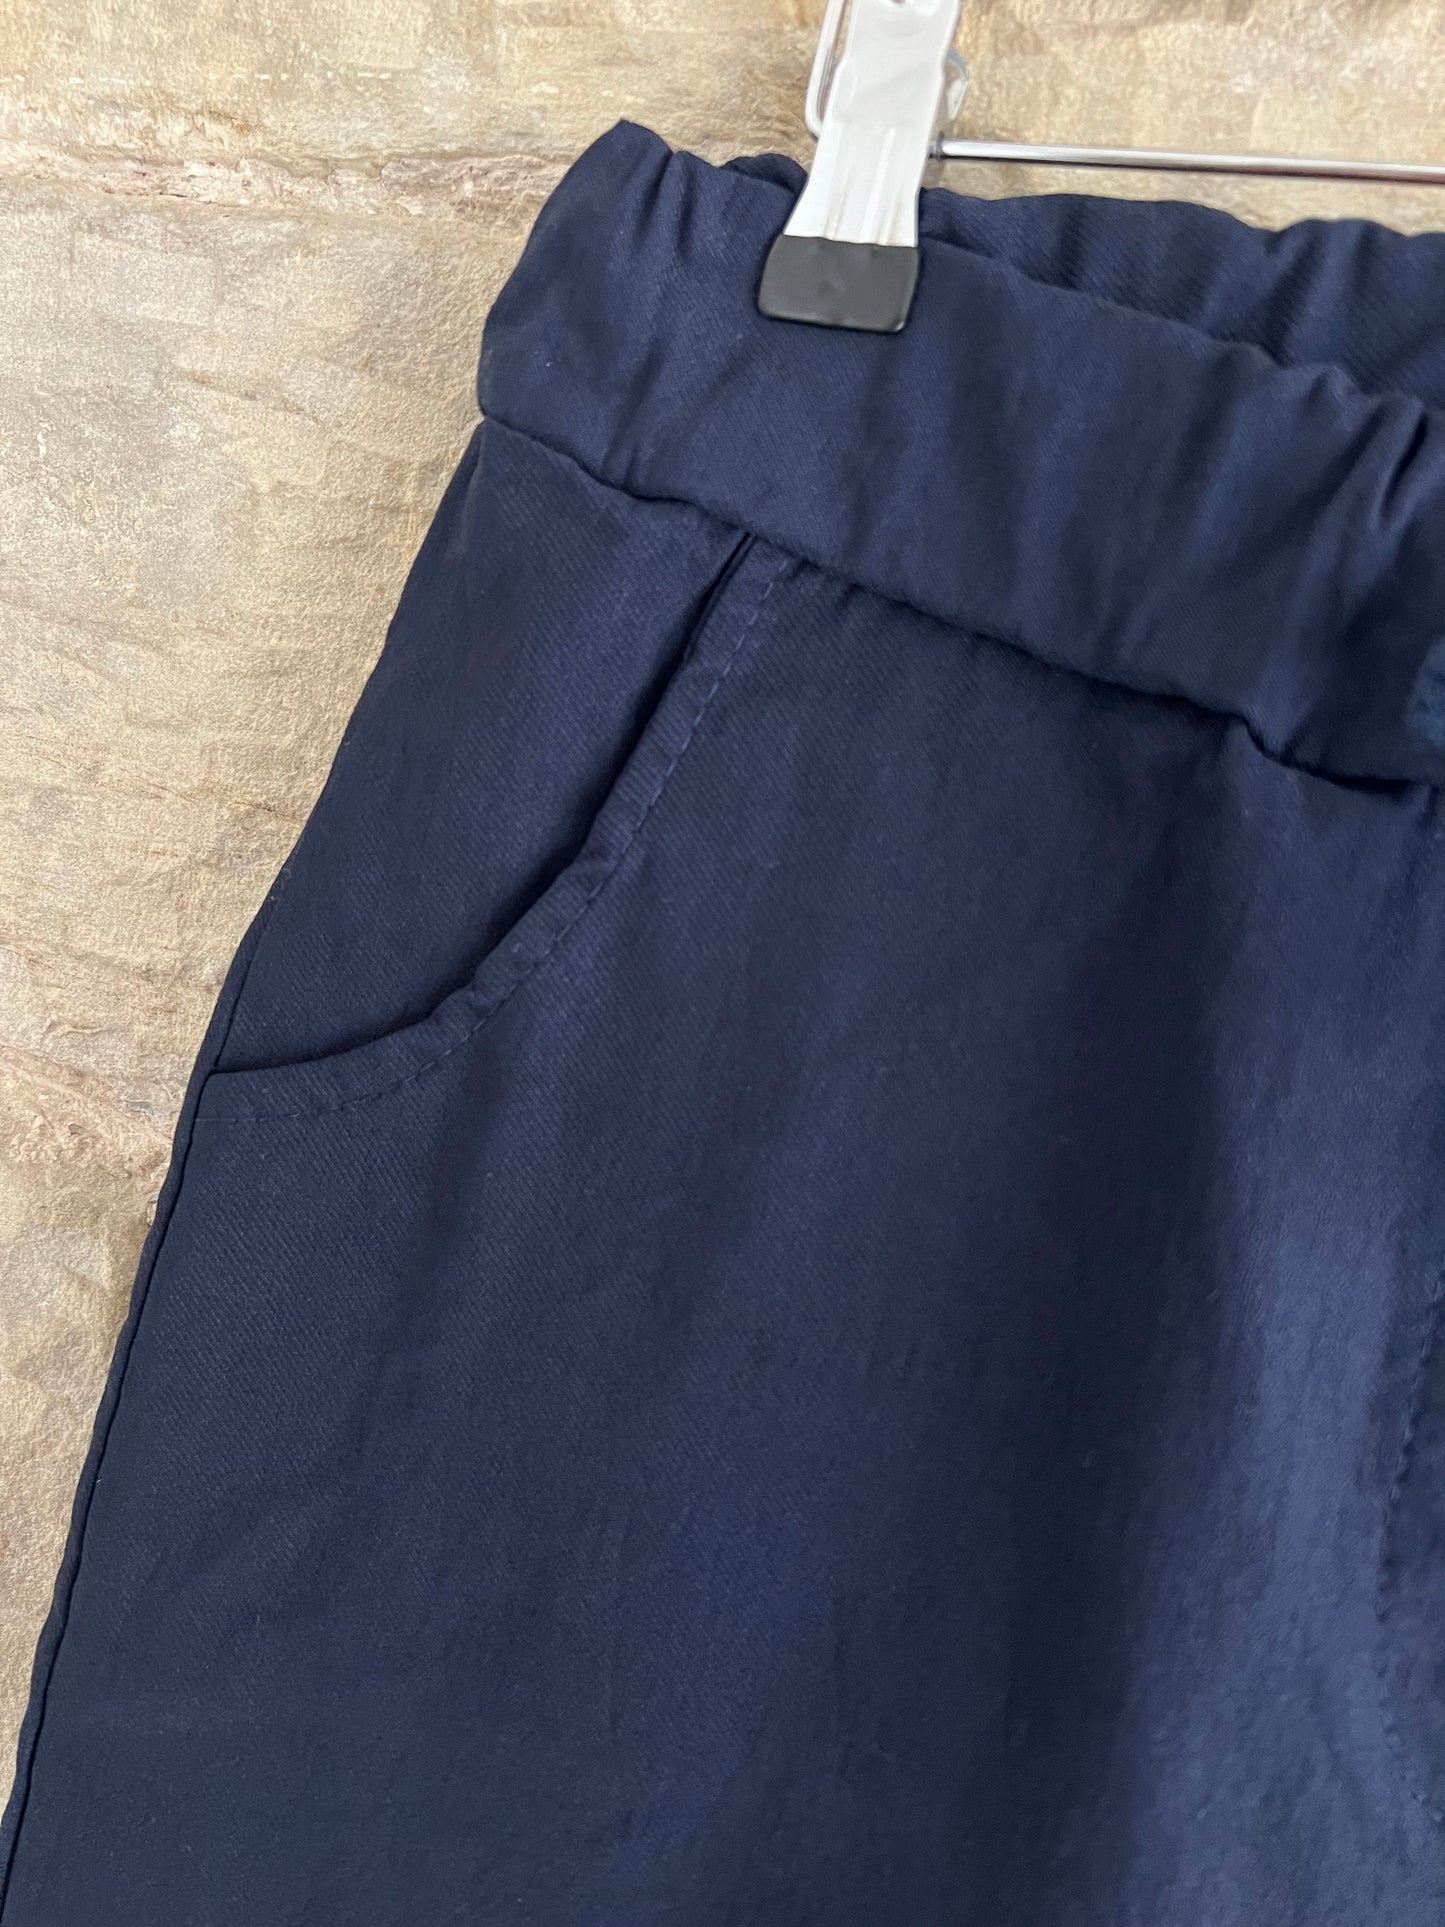 SMOOTH Magic Trousers - WRINKLE FREE - 2 Sizes - Navy